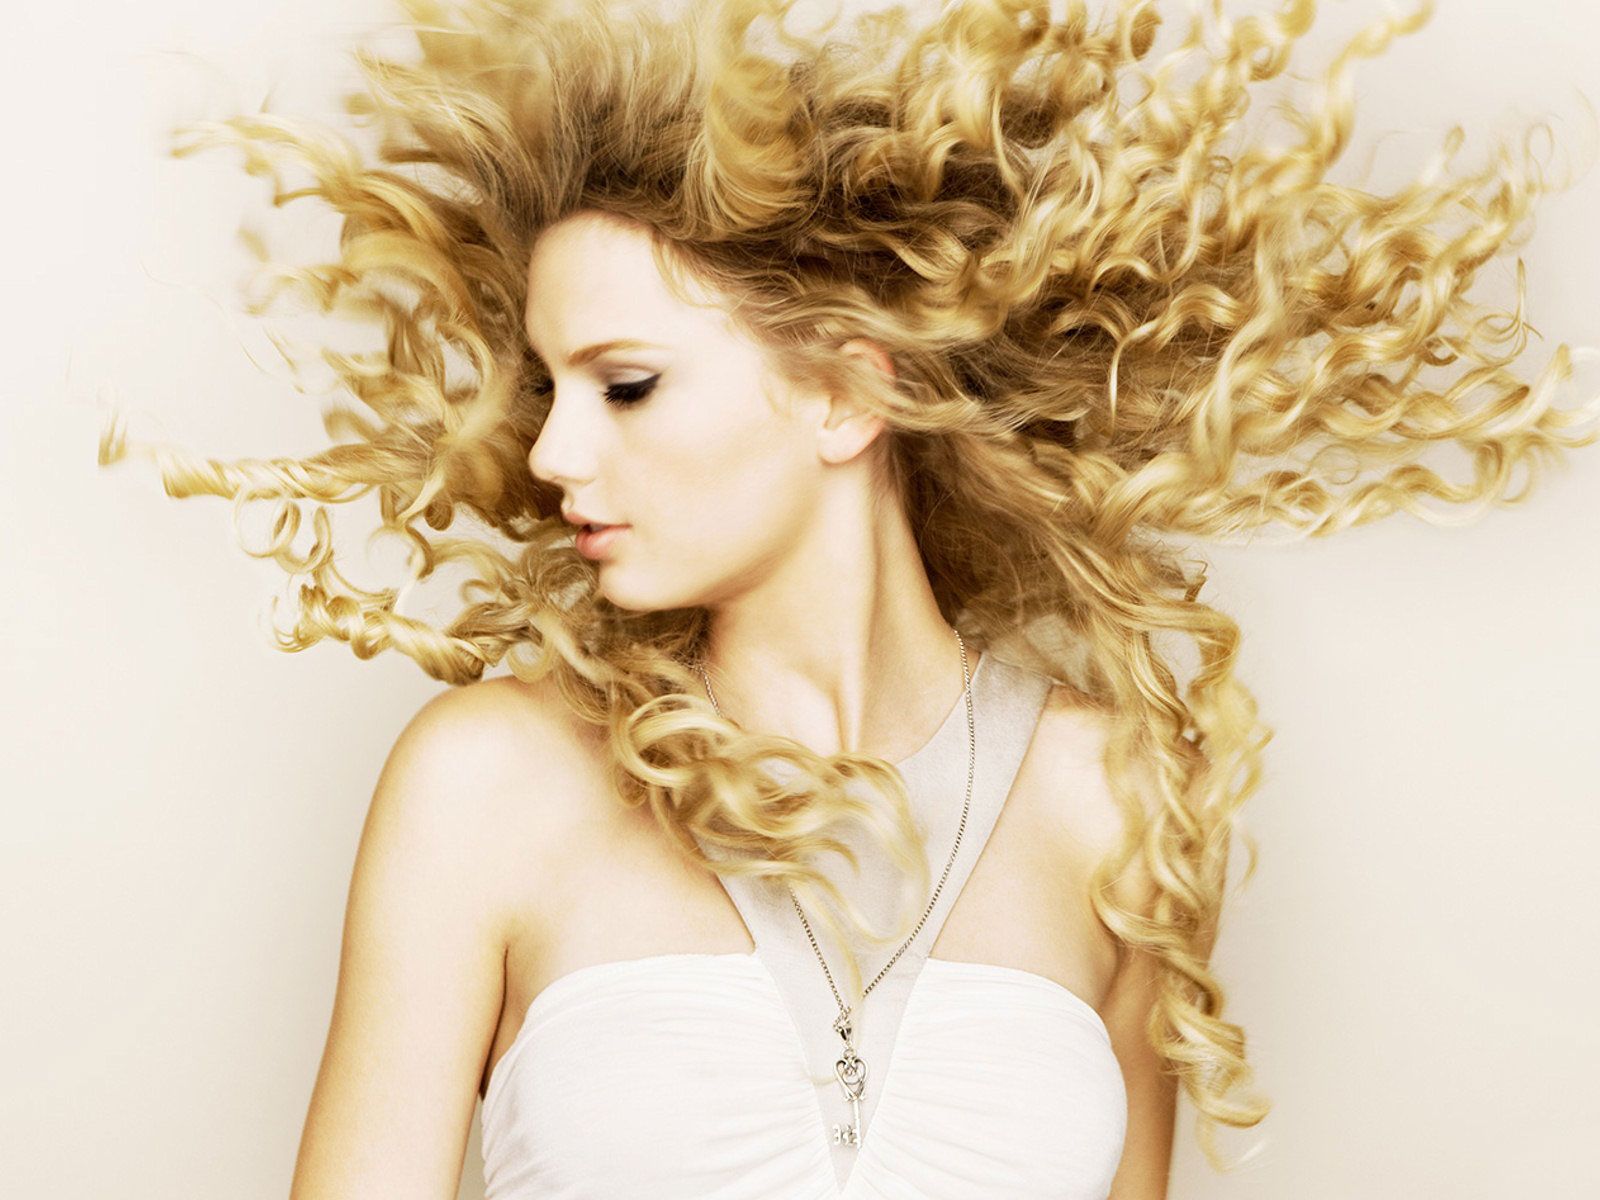 new HD Wallpapers of Taylor Swift - Wallpapers Mela